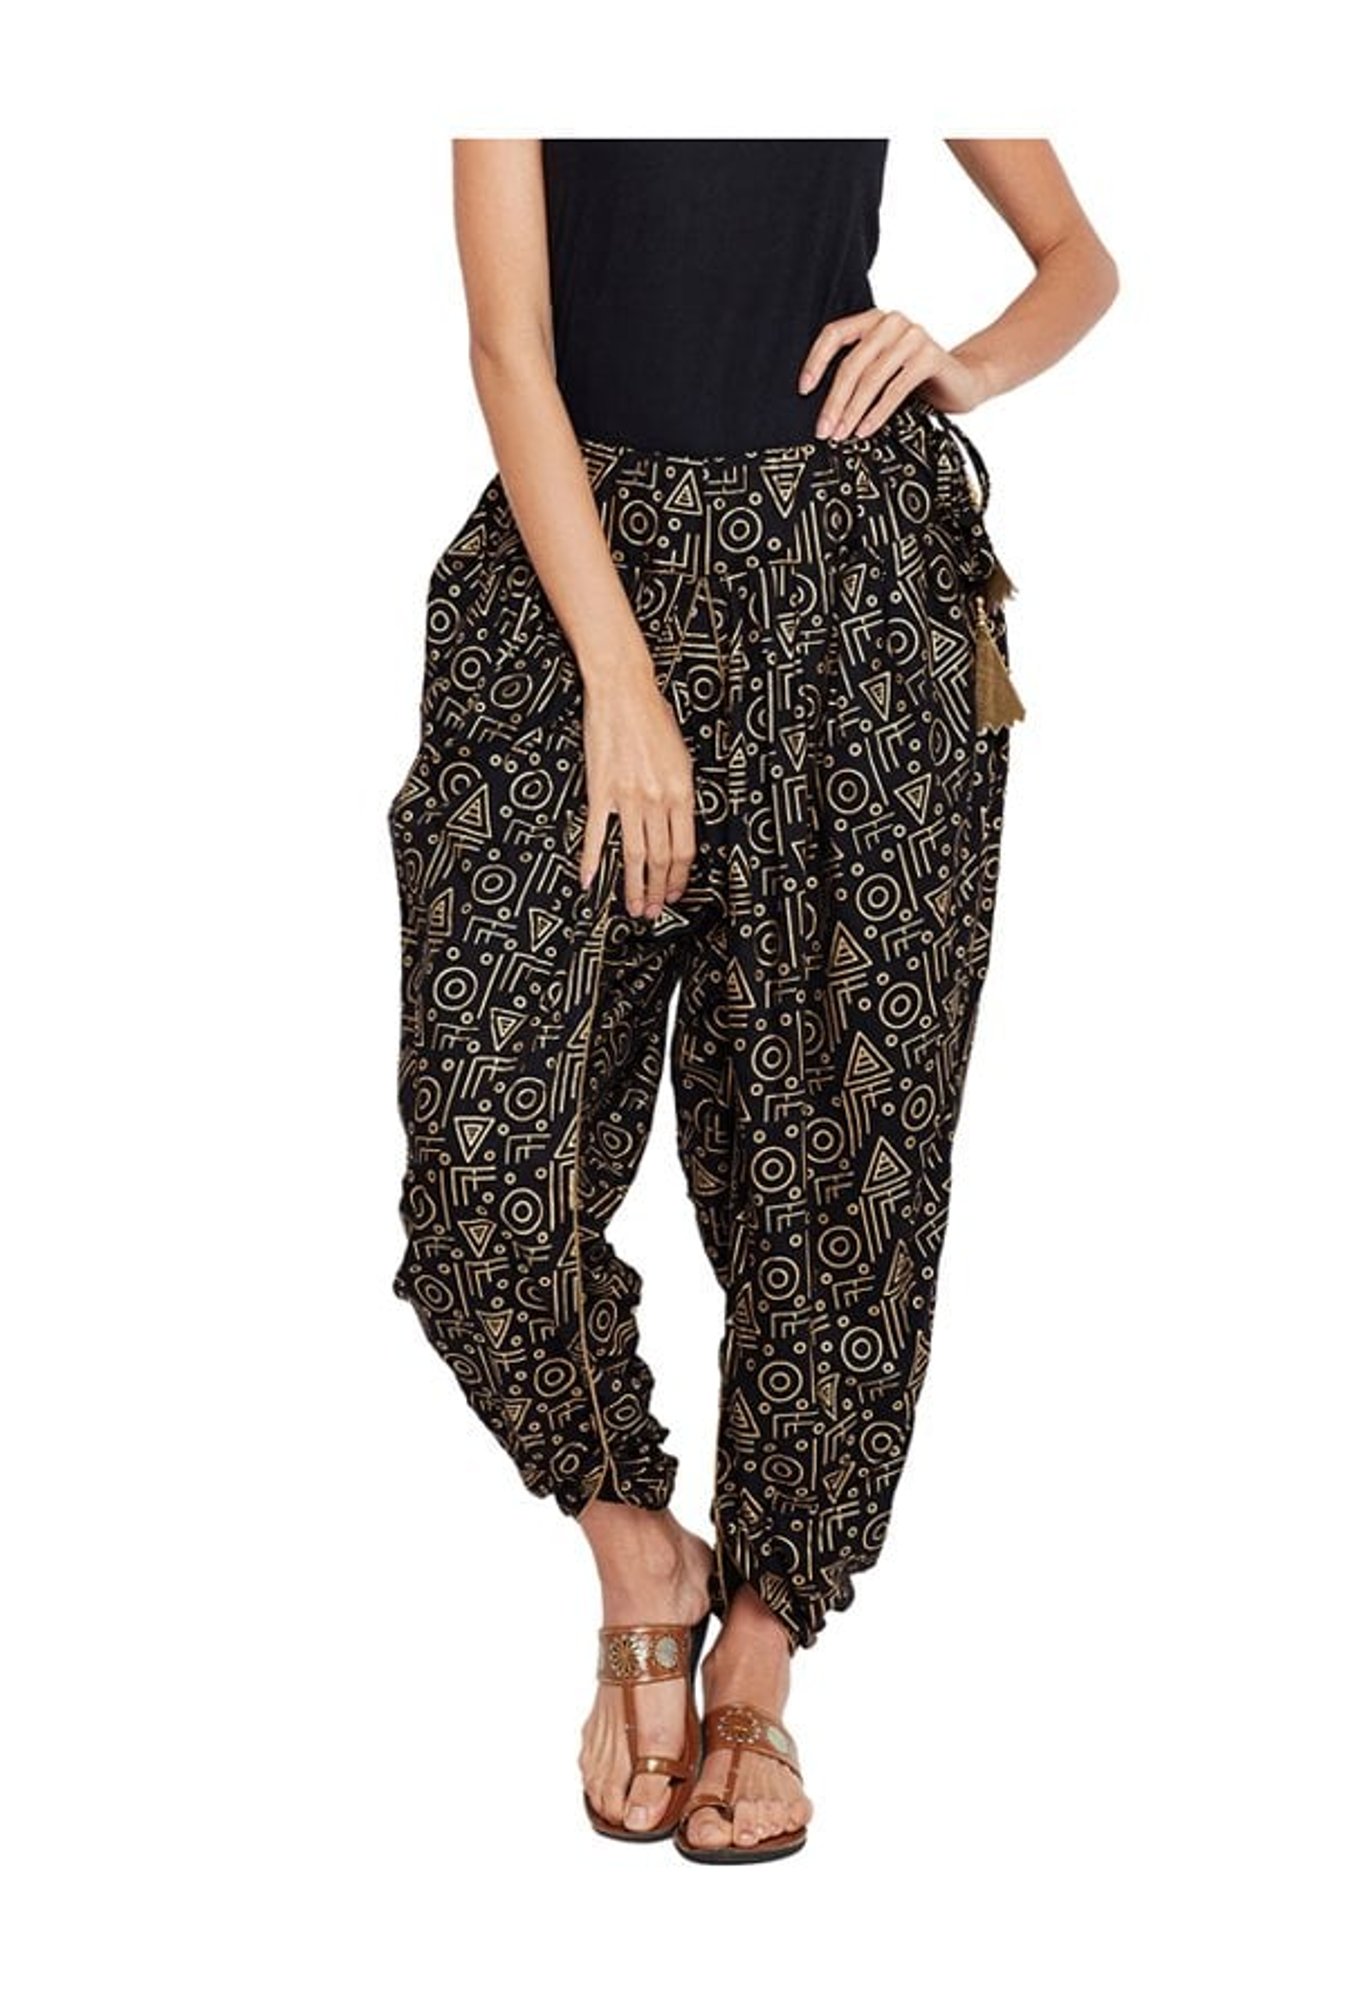 Floral Printed Ladies Yellow Dhoti Pant, Waist Size: 28.0 at Rs 120/piece  in Ghaziabad